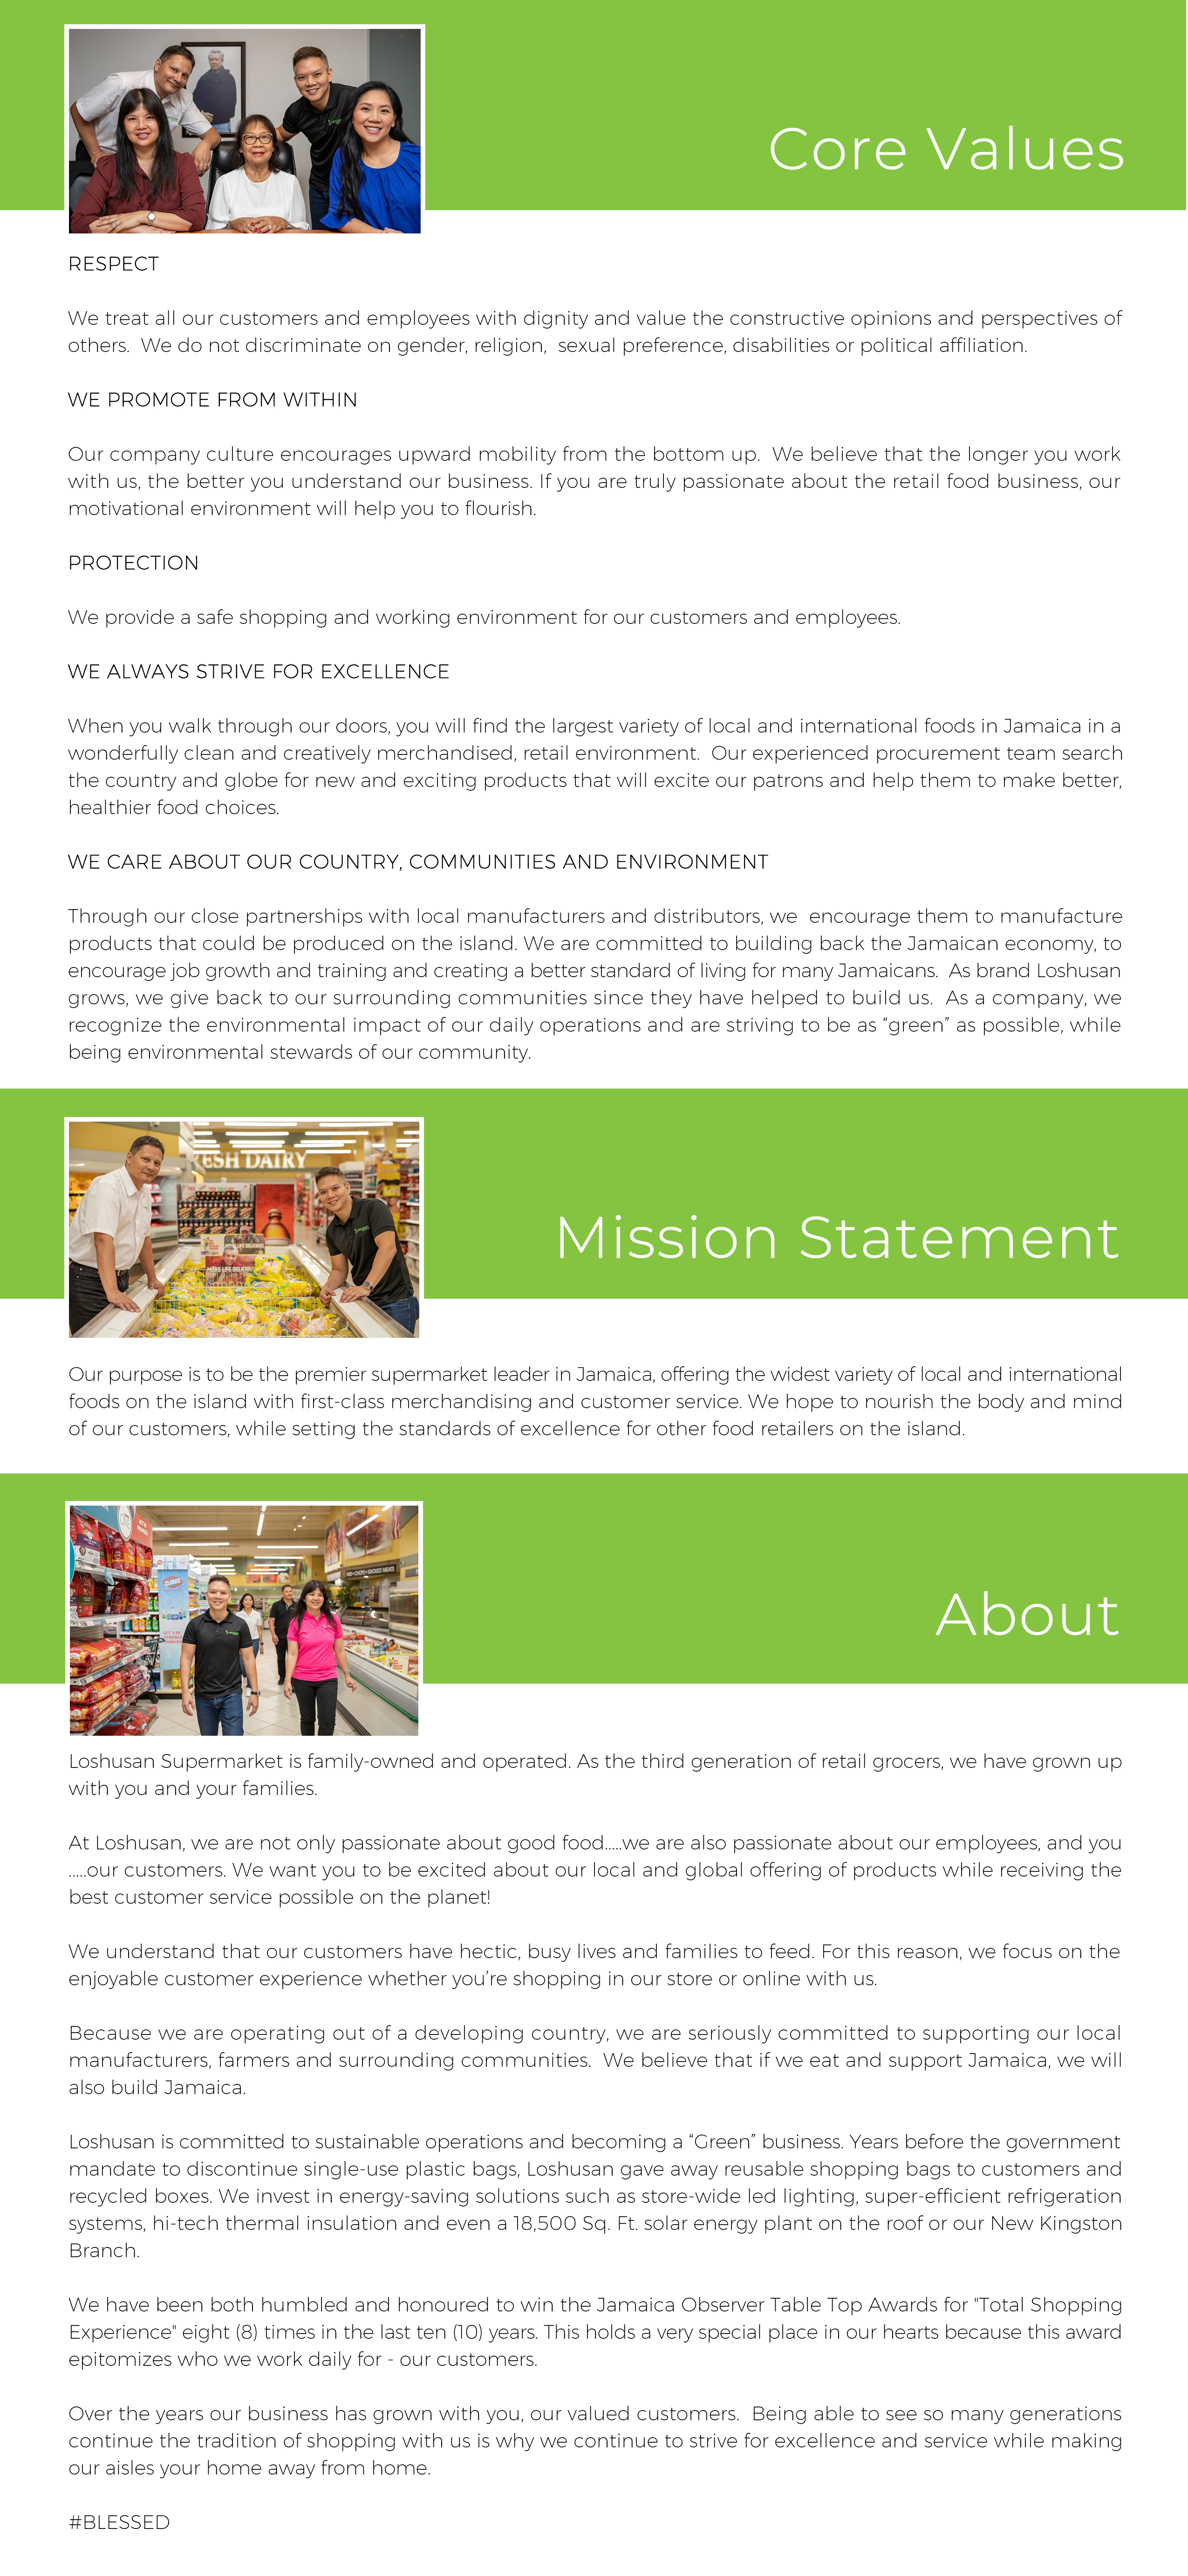 about-core-values-mission-4.jpg